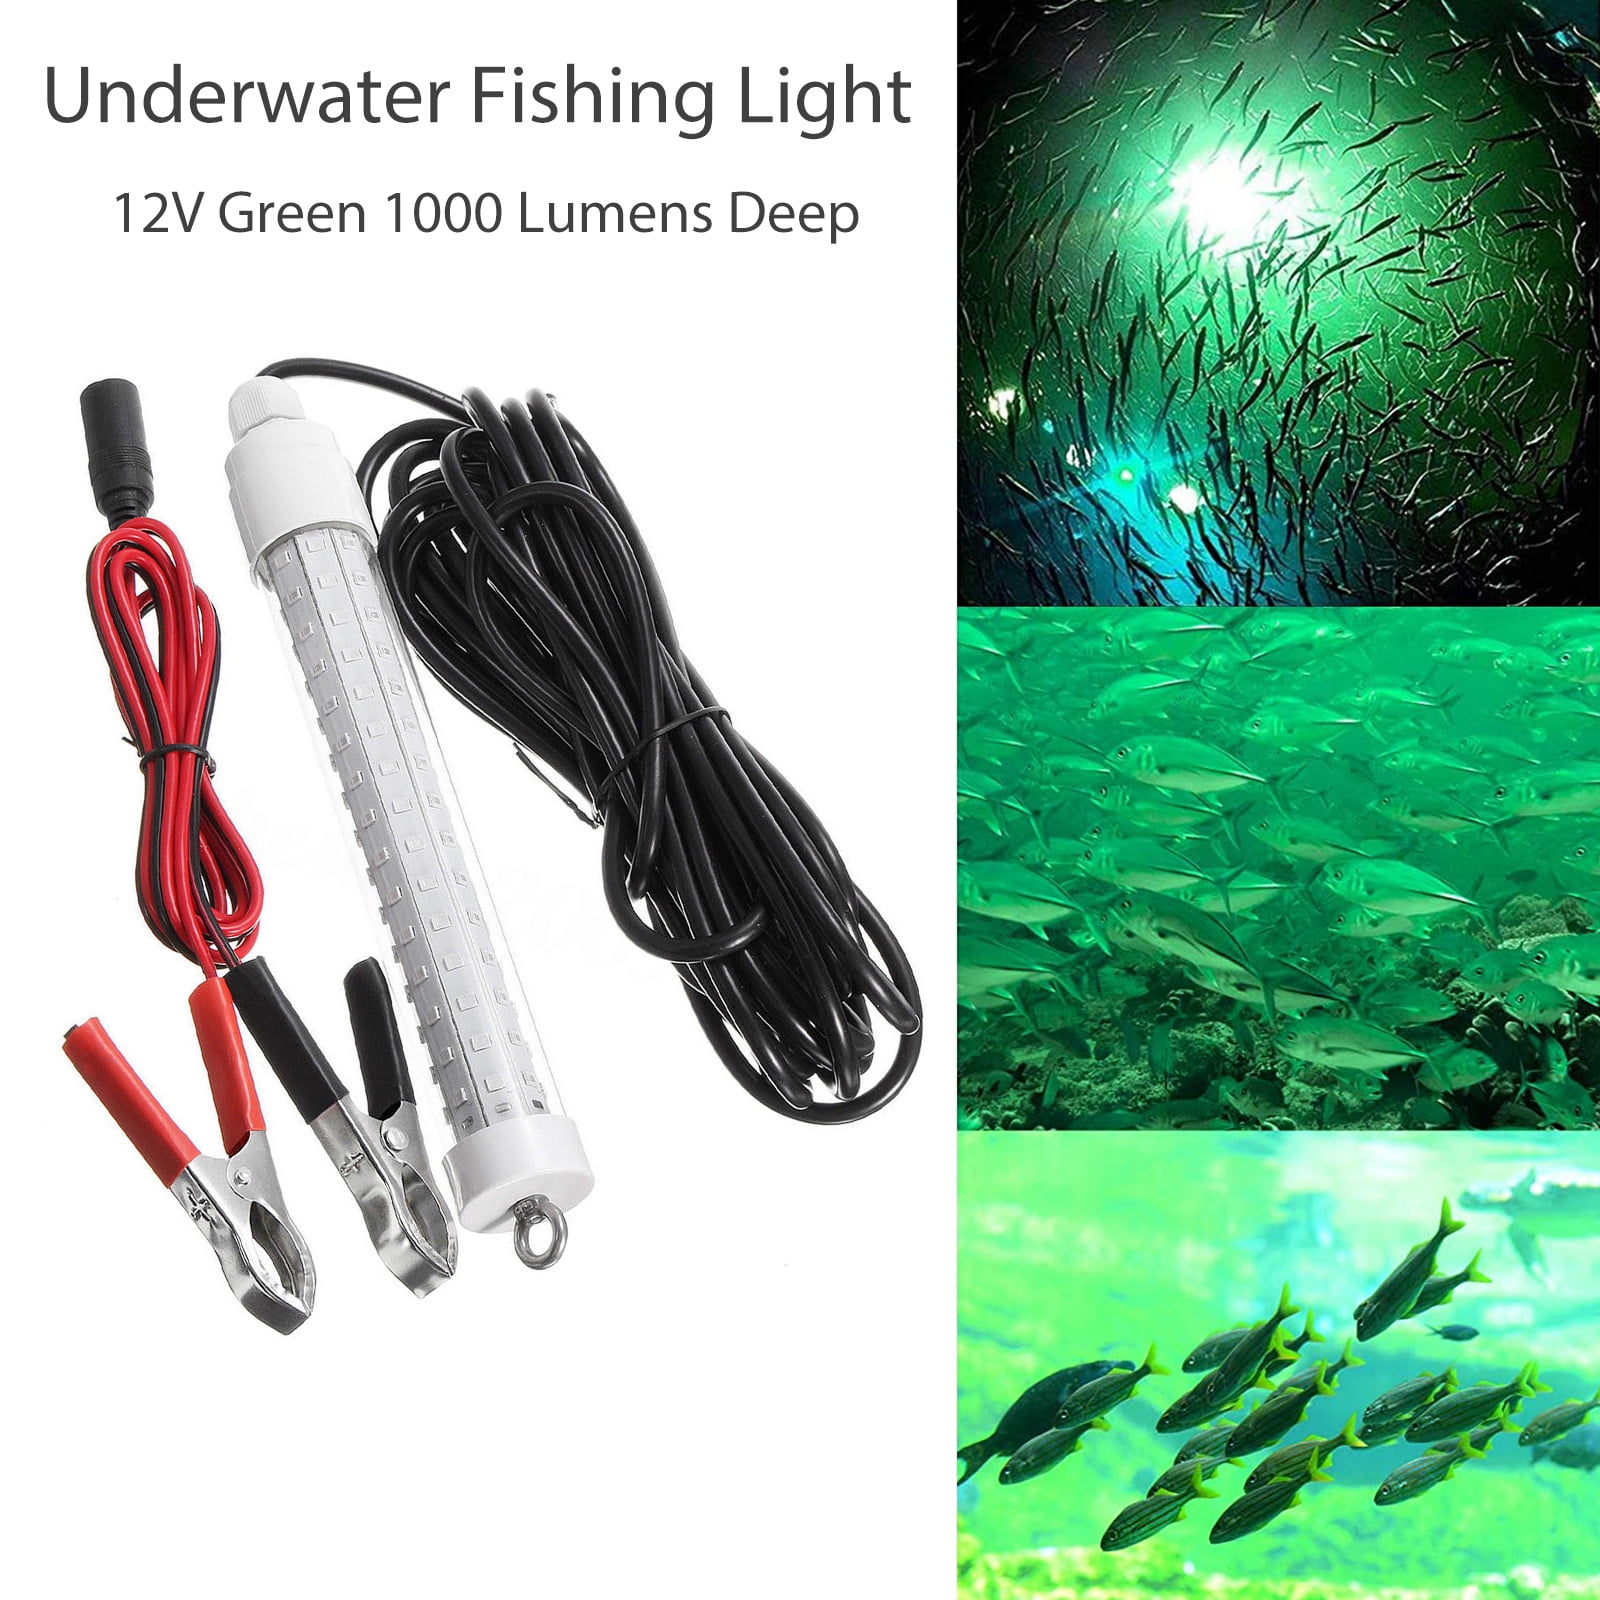 12V LED Green Underwater Submersible Fishing Light Crappie Shad Squids Fish Lamp 